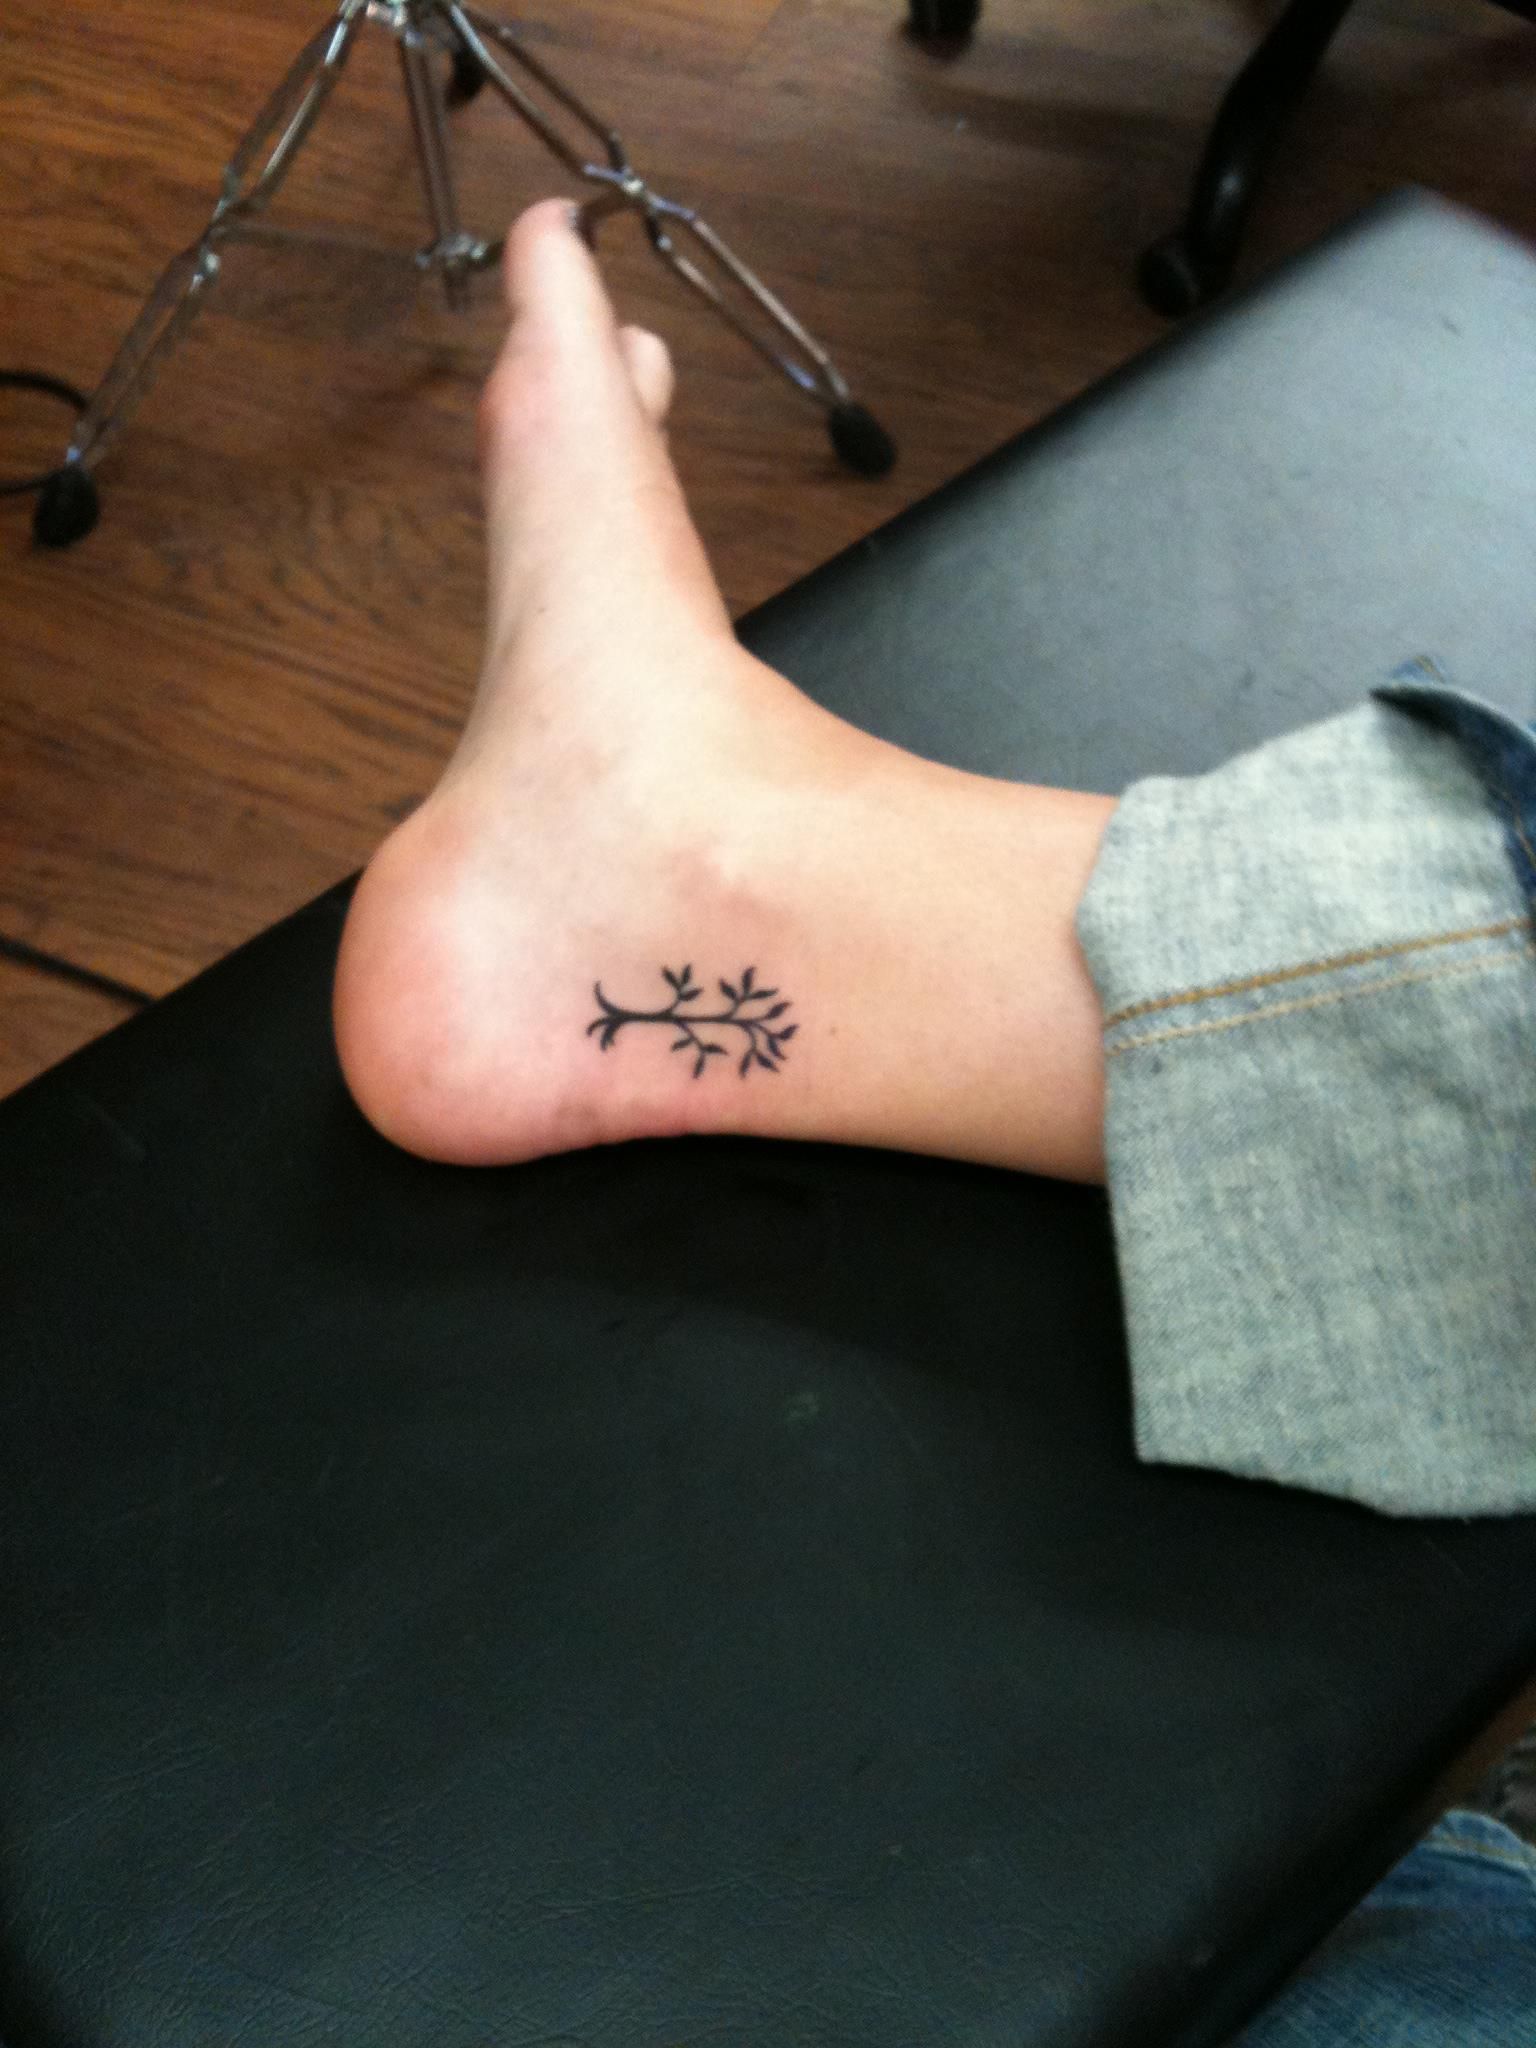 Yes! Right in that soft spot of the inside ankle…tree ankle tattoo